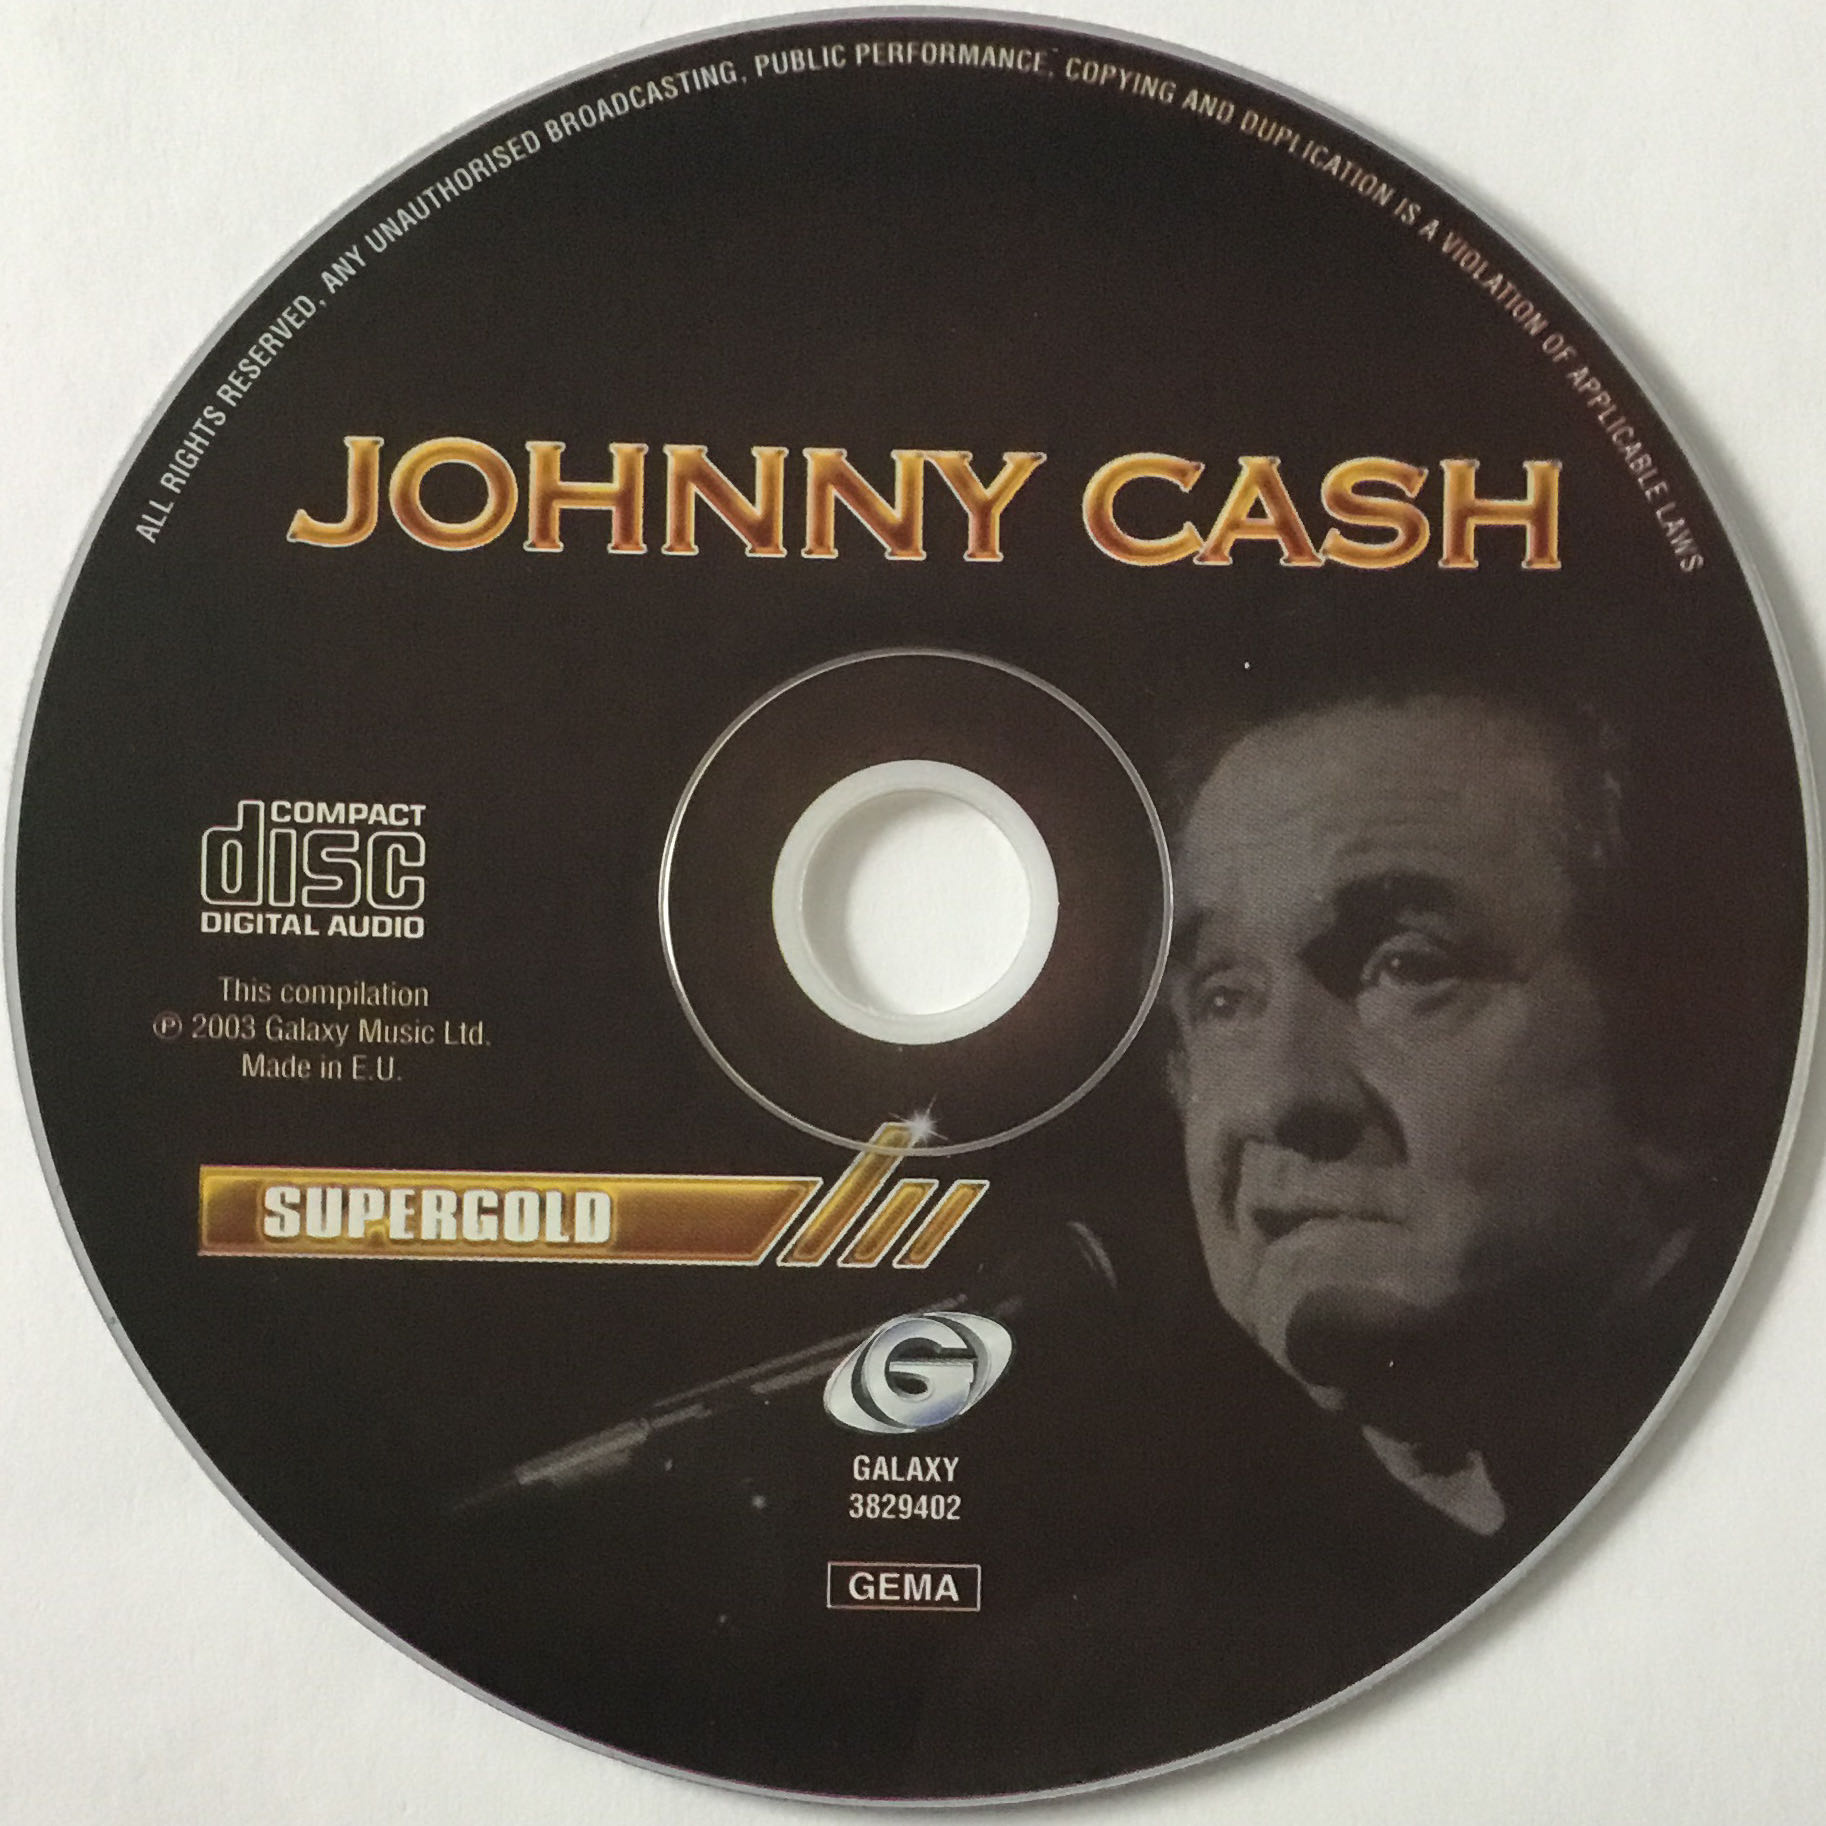 Johnny Cash - Cash, Johnny (CD - 0) music collectible [Barcode 8711638294021] - Main Image 4